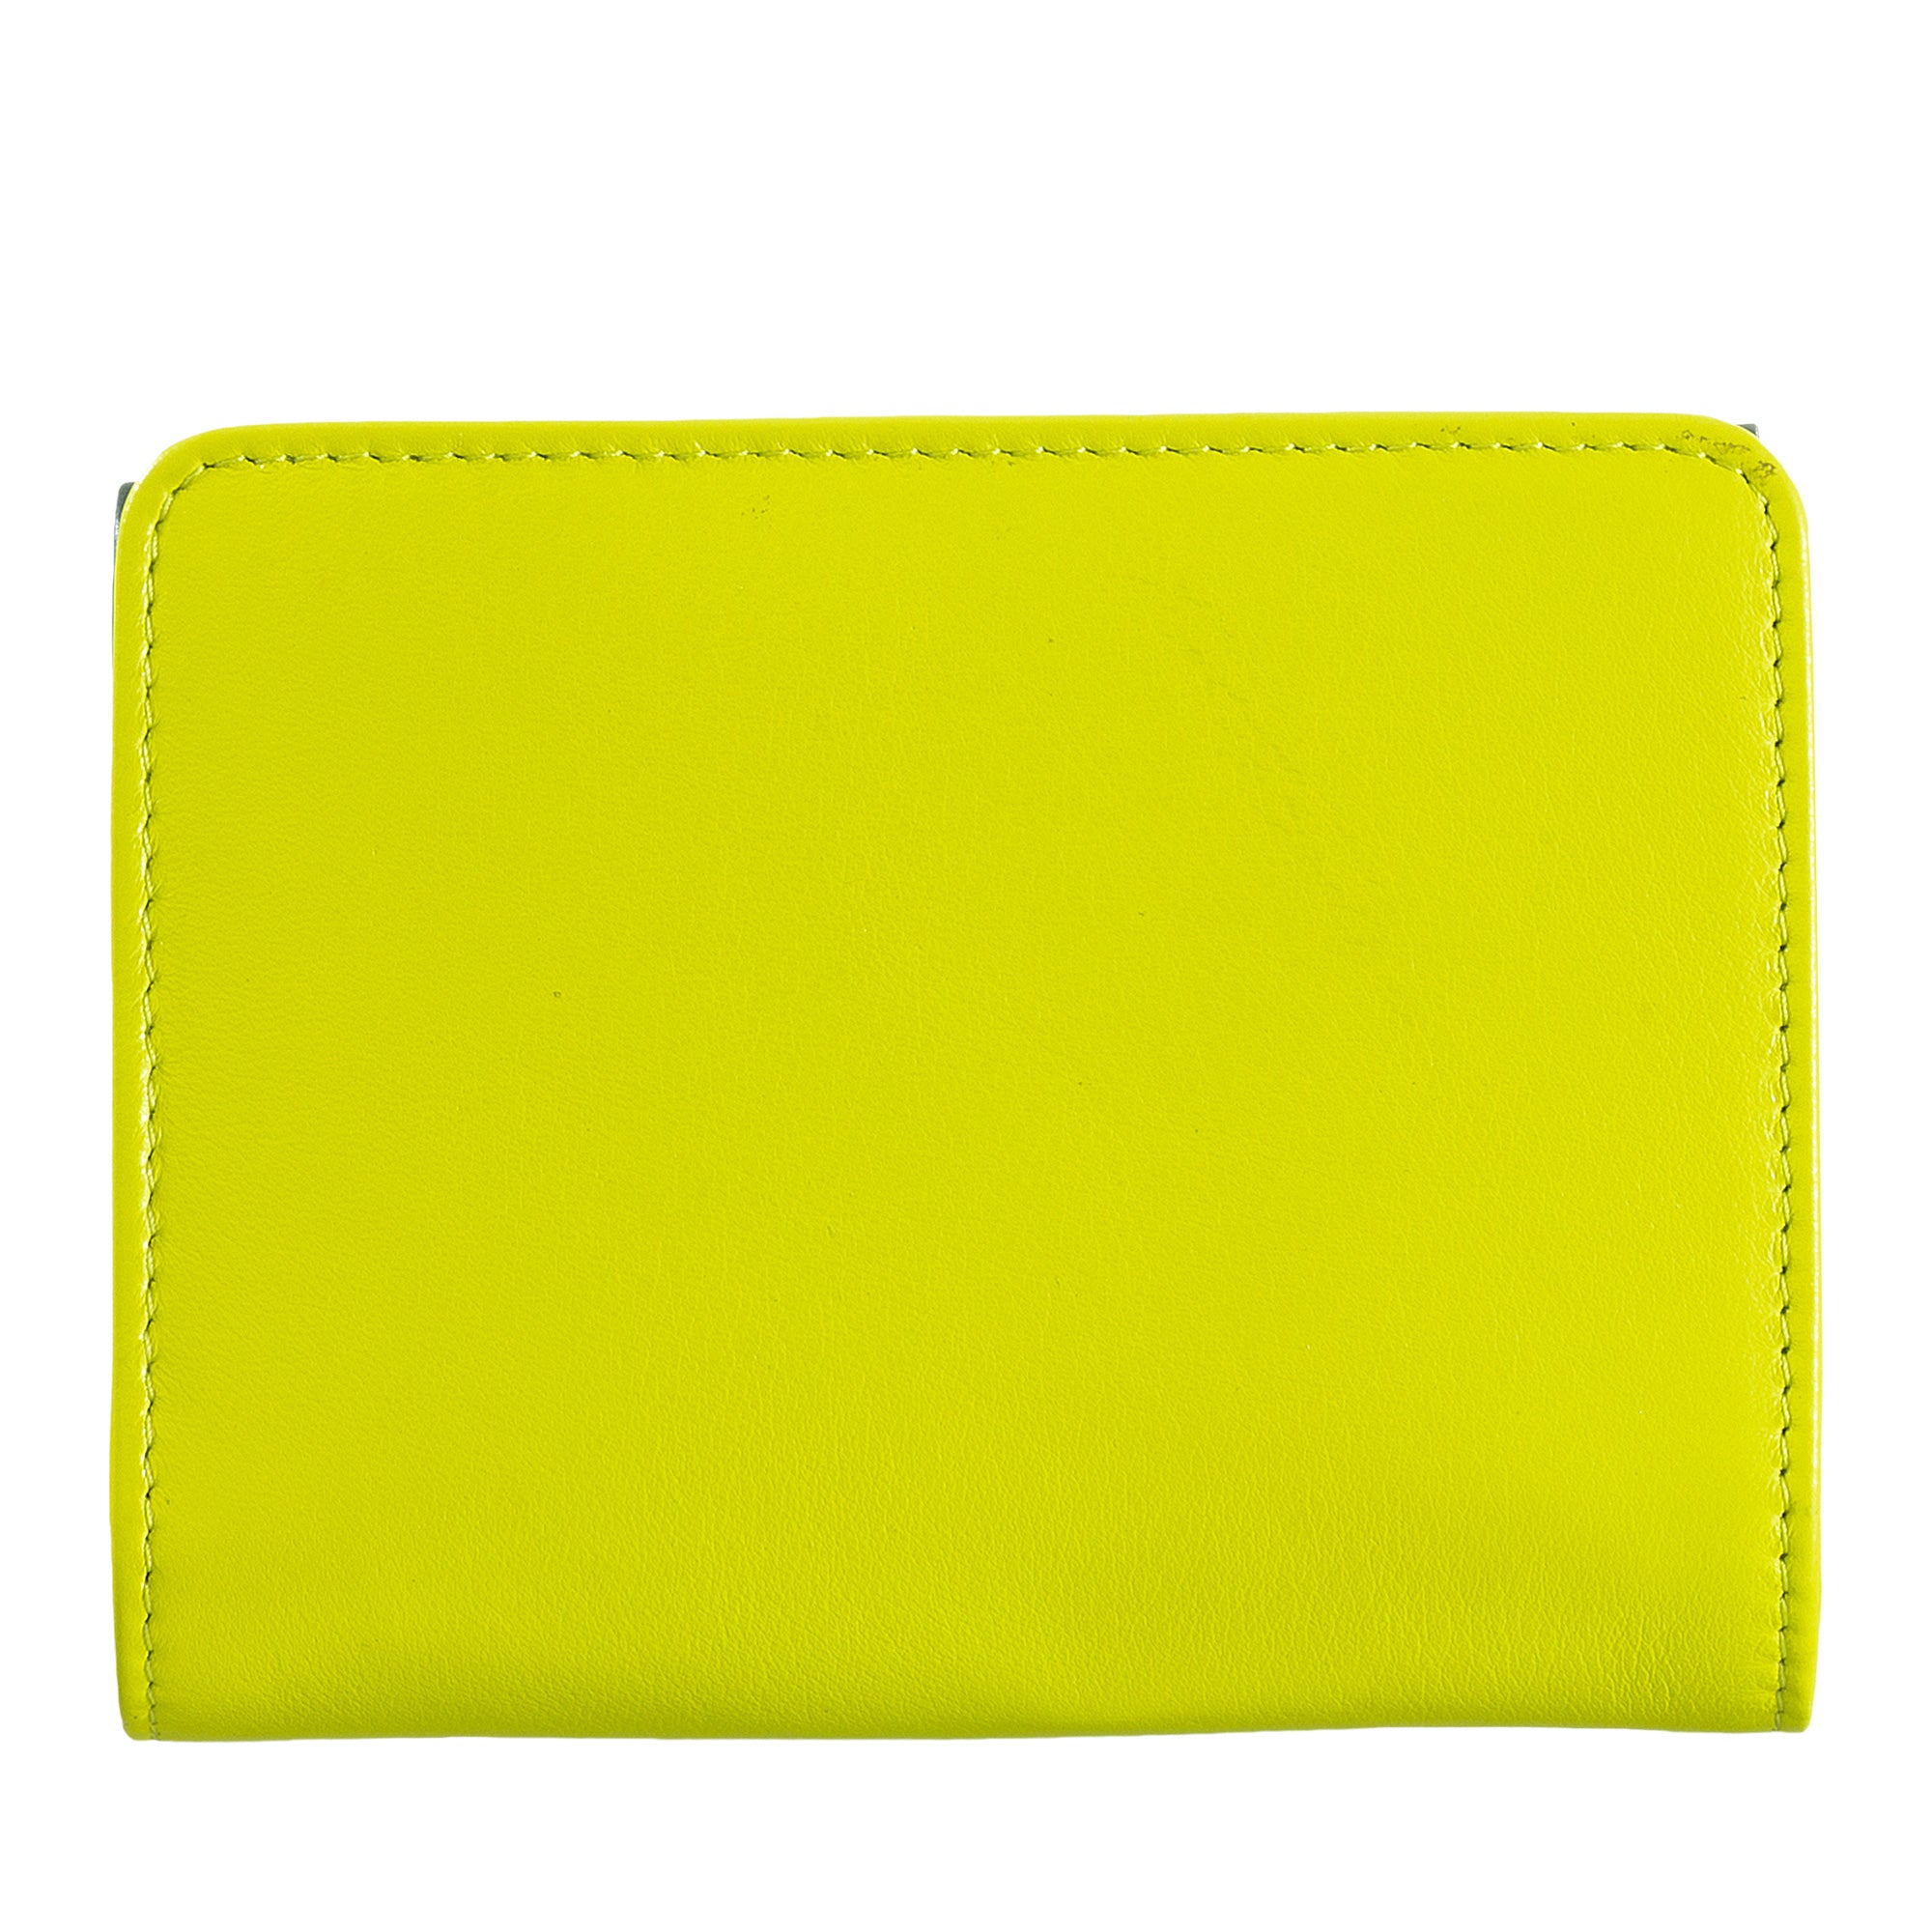 DUDU Women's Small RFID Multicolor Leather Wallet